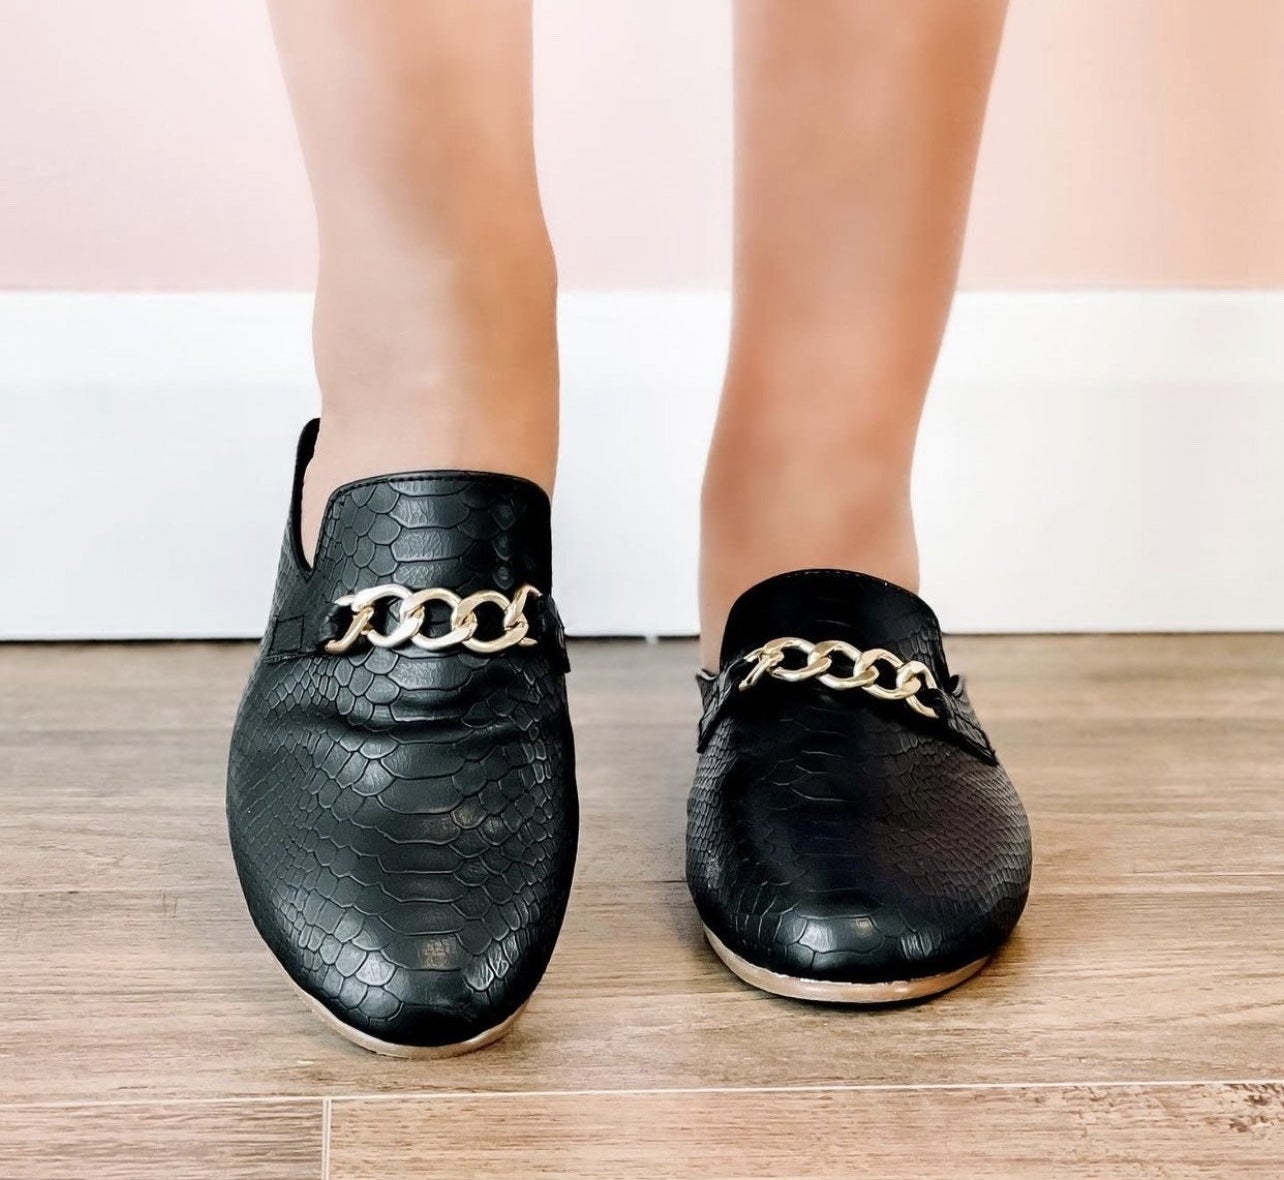 Model is wearing black vegan leather loafers with a gold chain buckle on the top